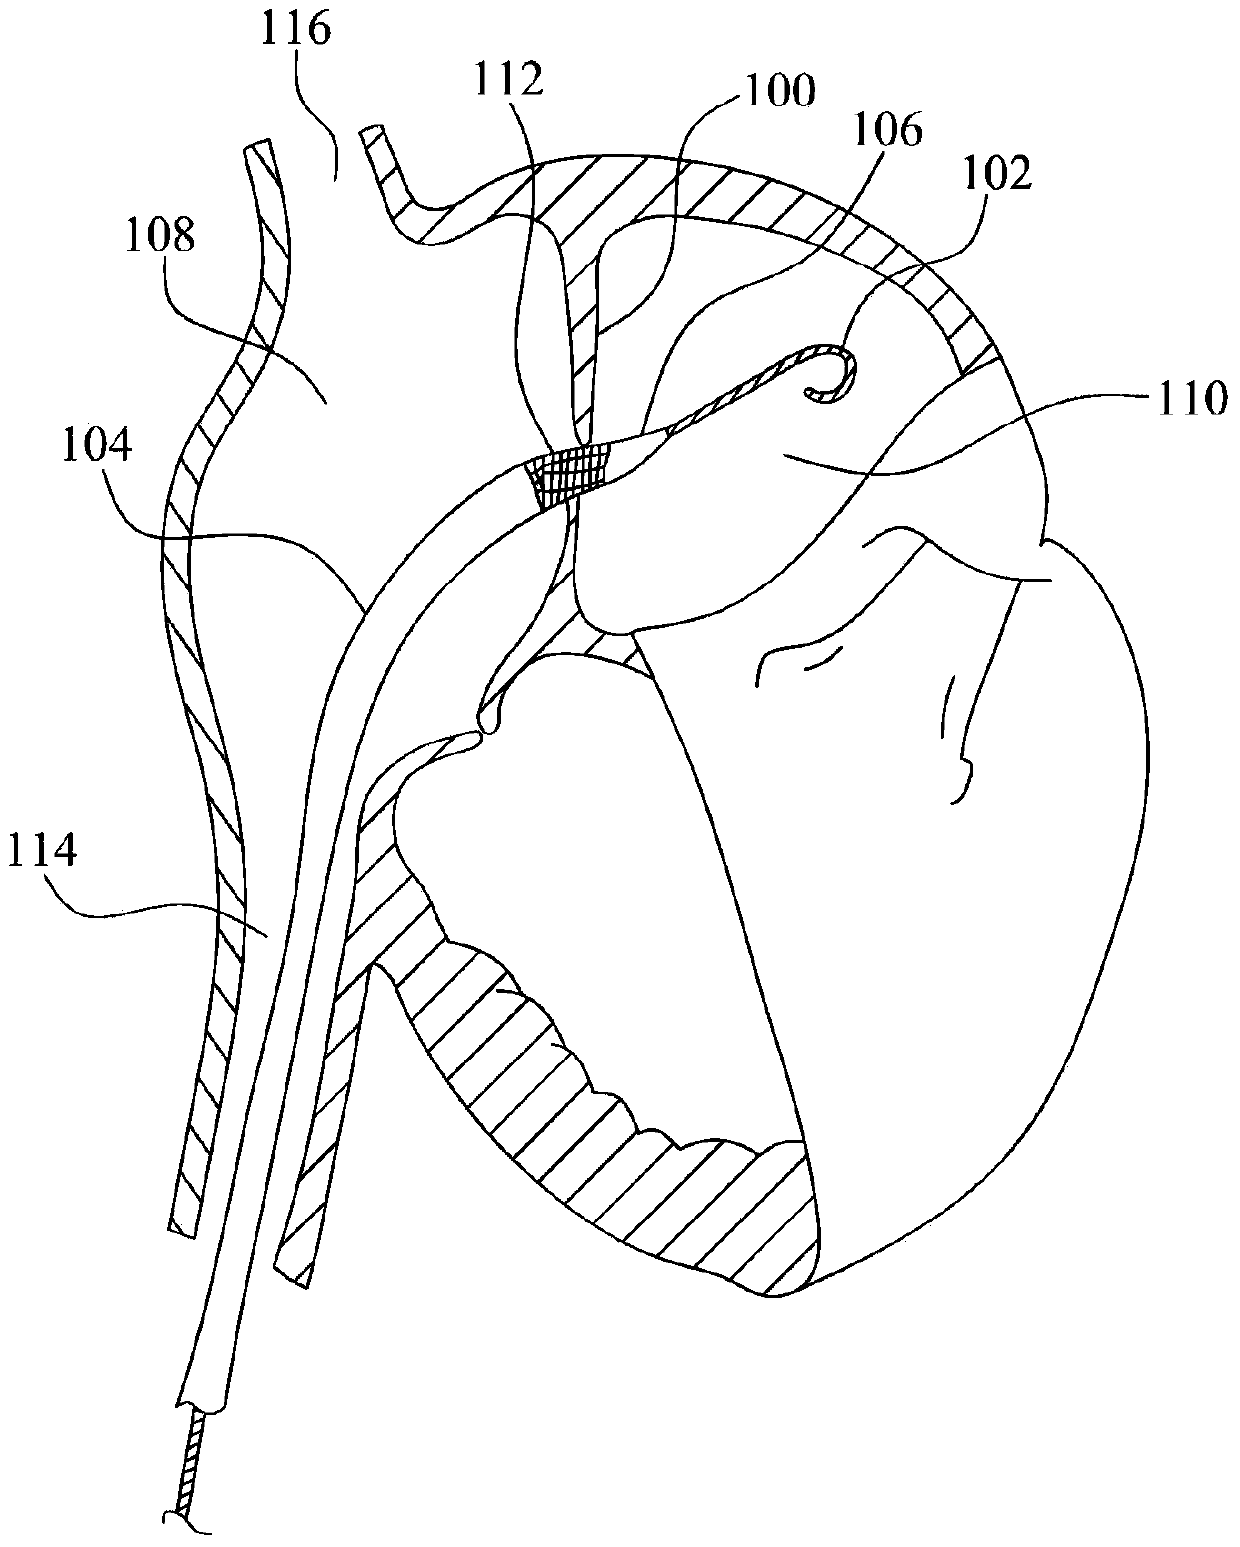 Apparatus and methods to create and maintain an intra-atrial pressure relief opening